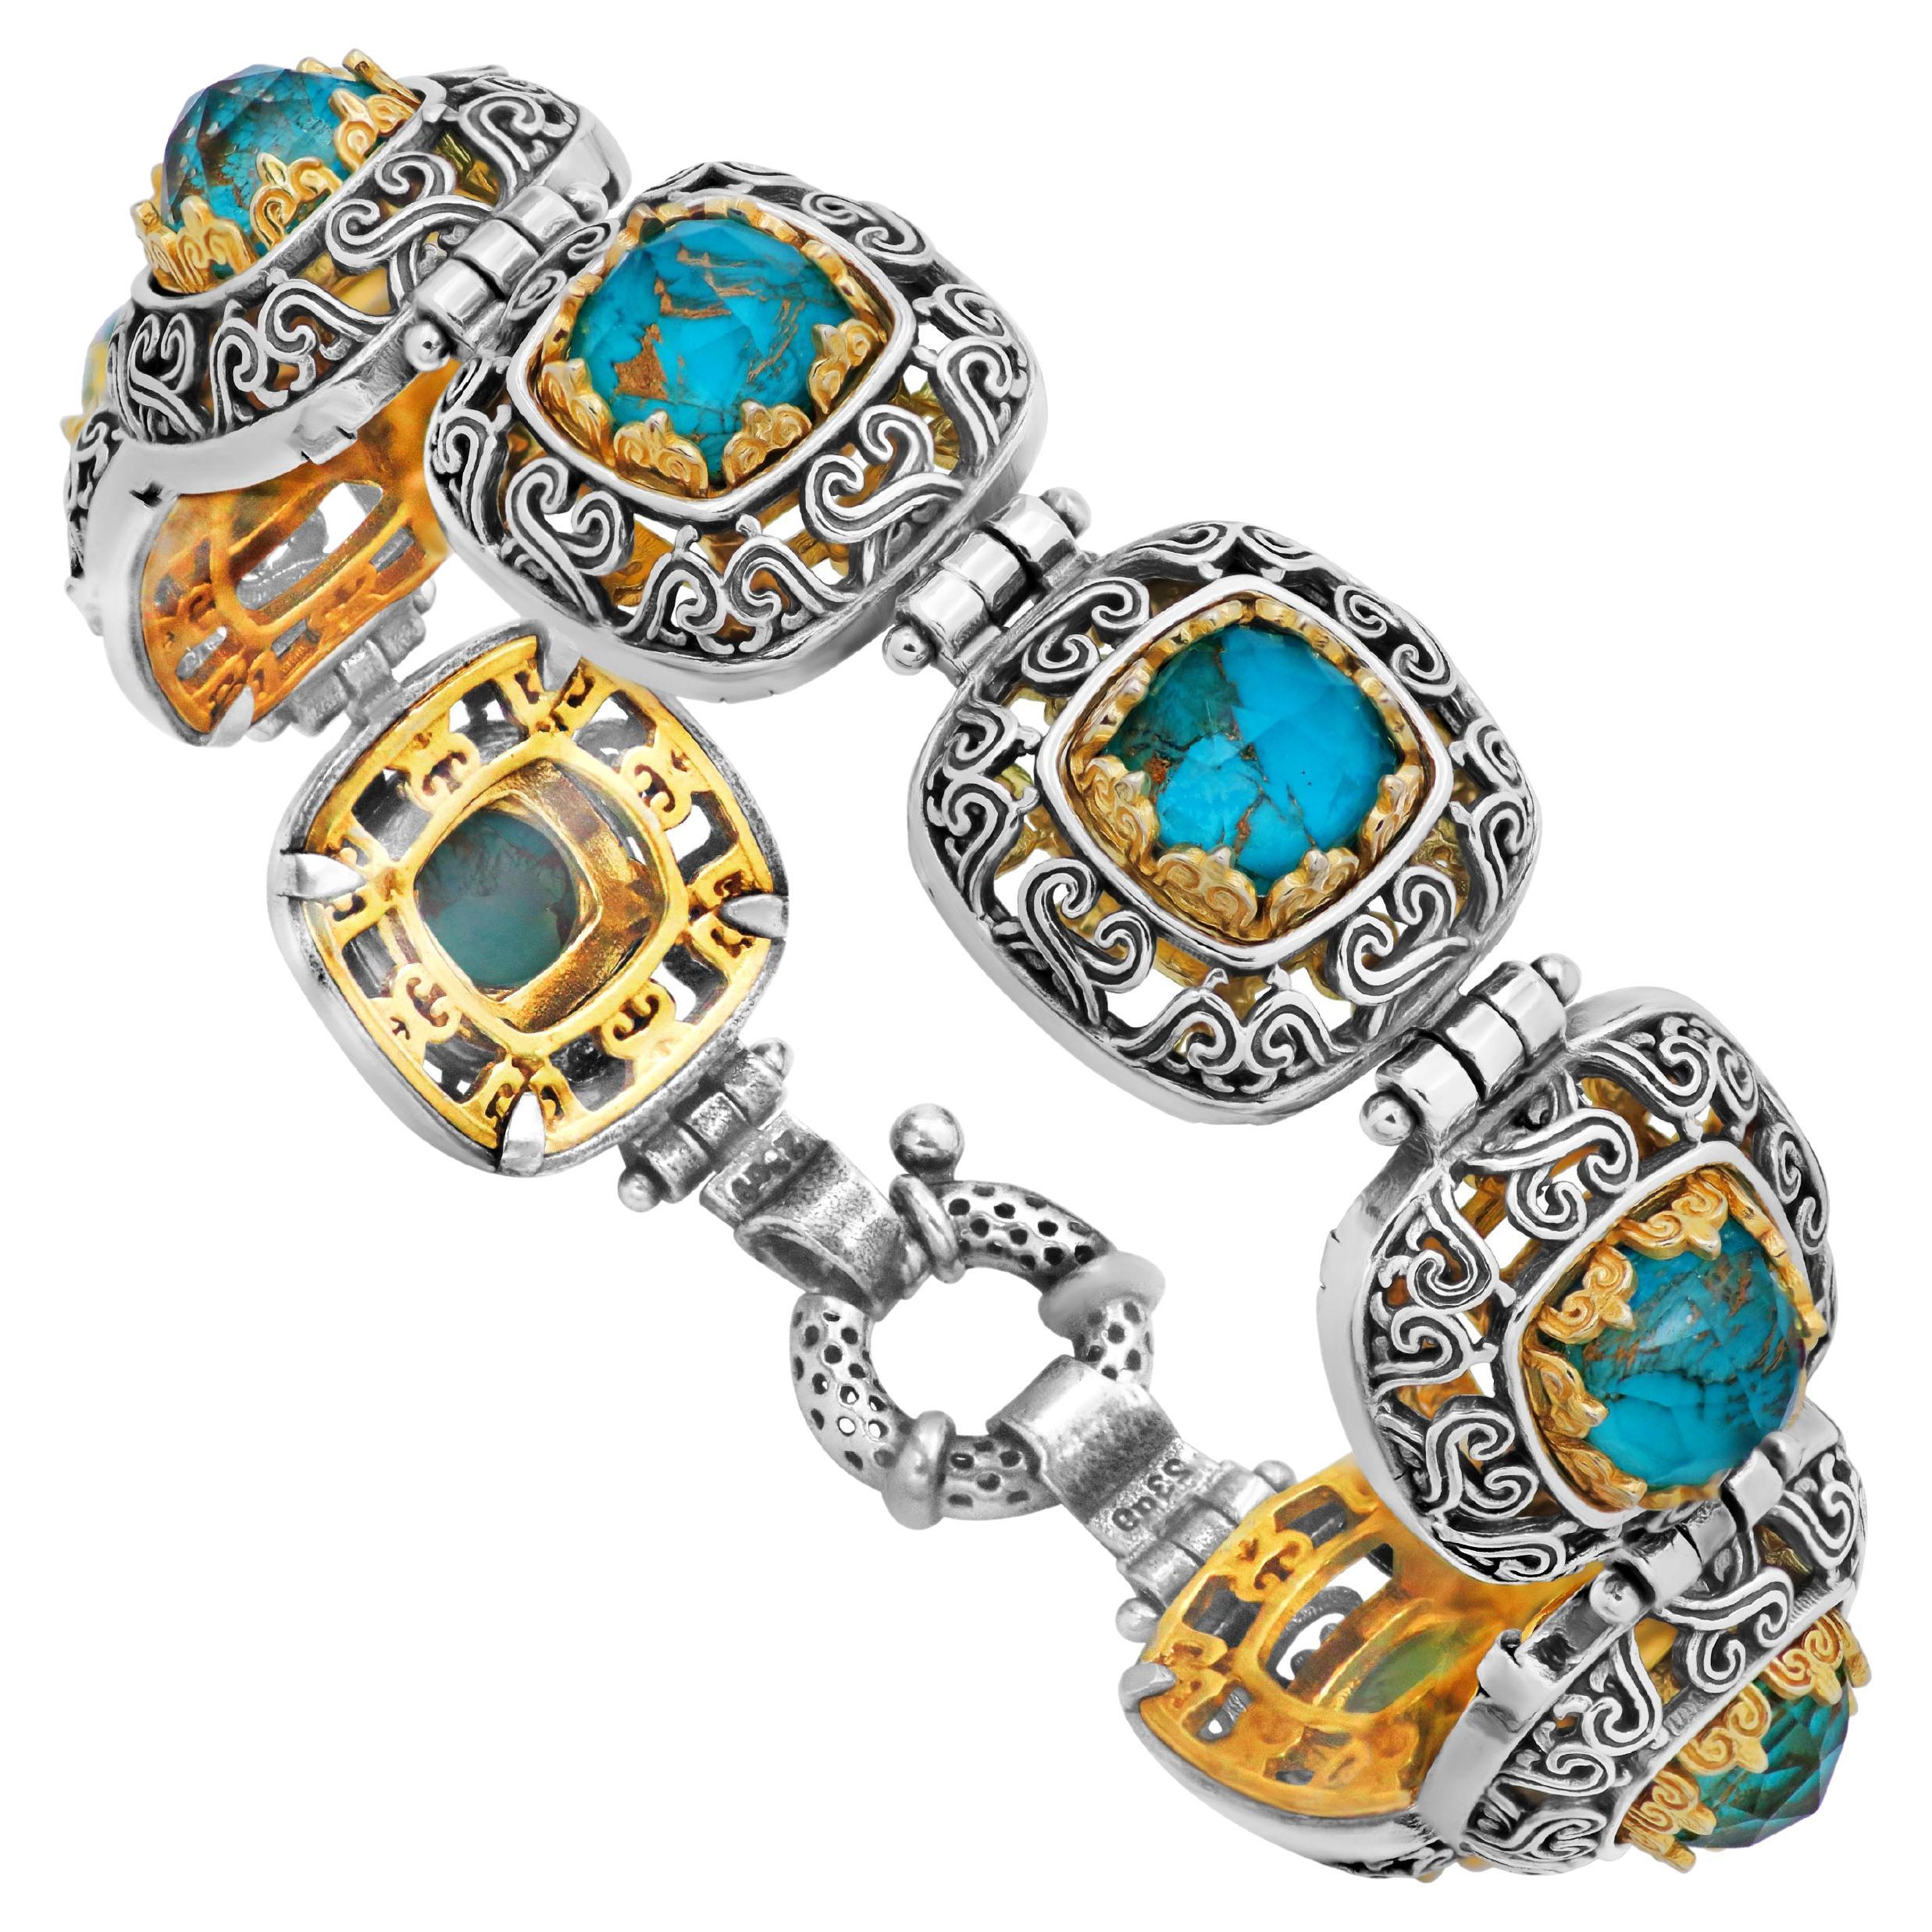 Silver Byzantine Bracelet with Doublet Copper Turquoise